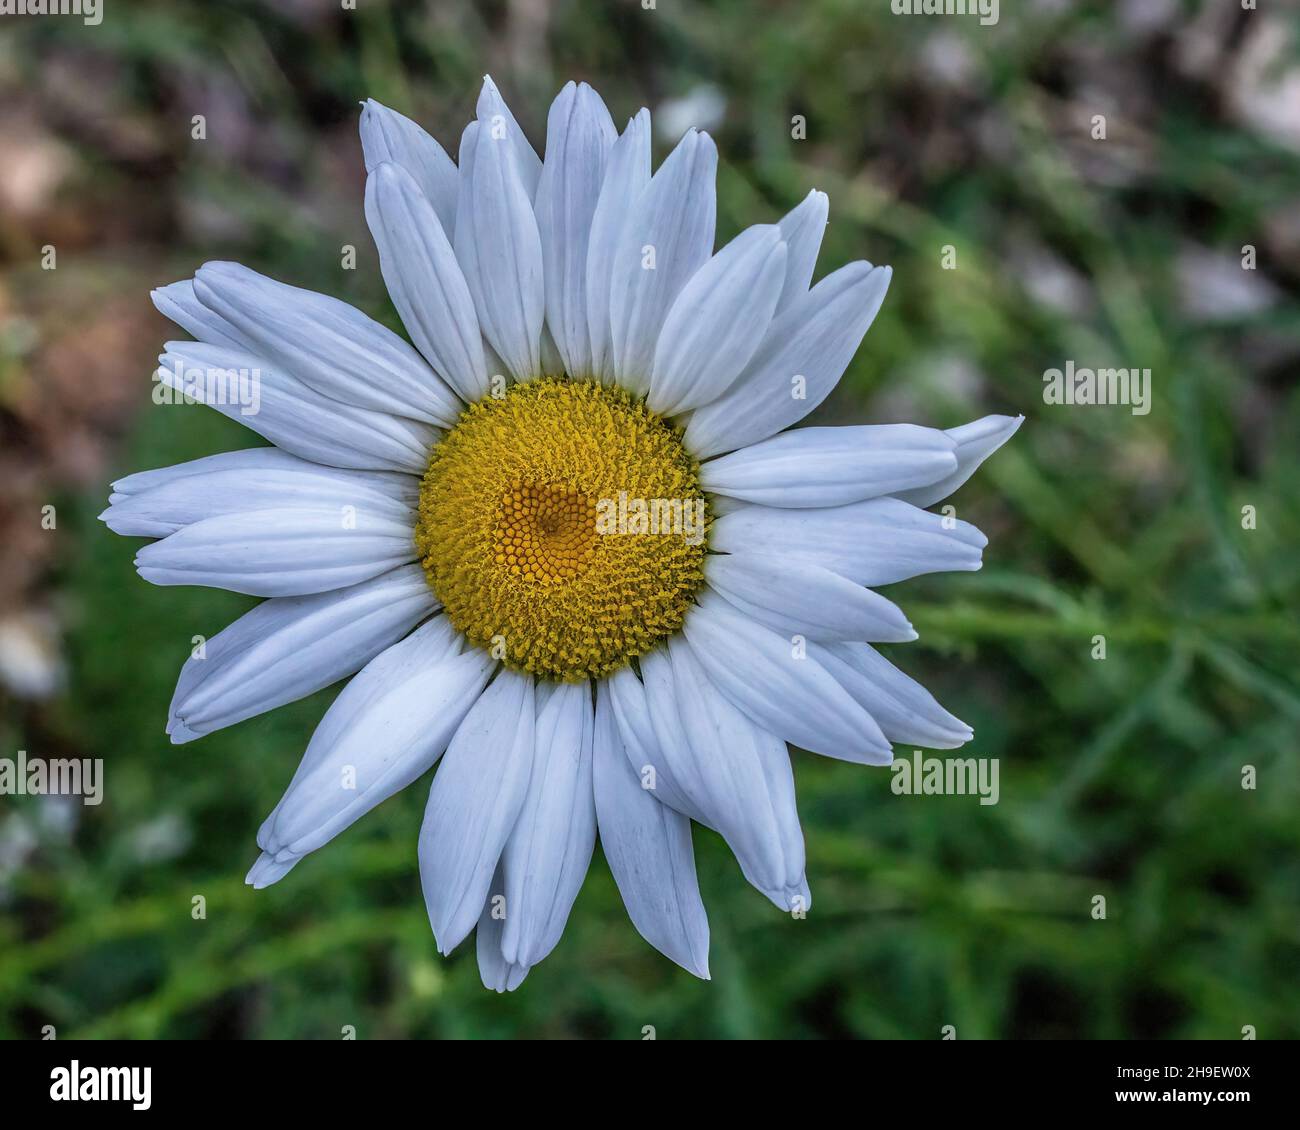 Closeup of an ox eye daisy which is an edible and medicinal plant. Stock Photo